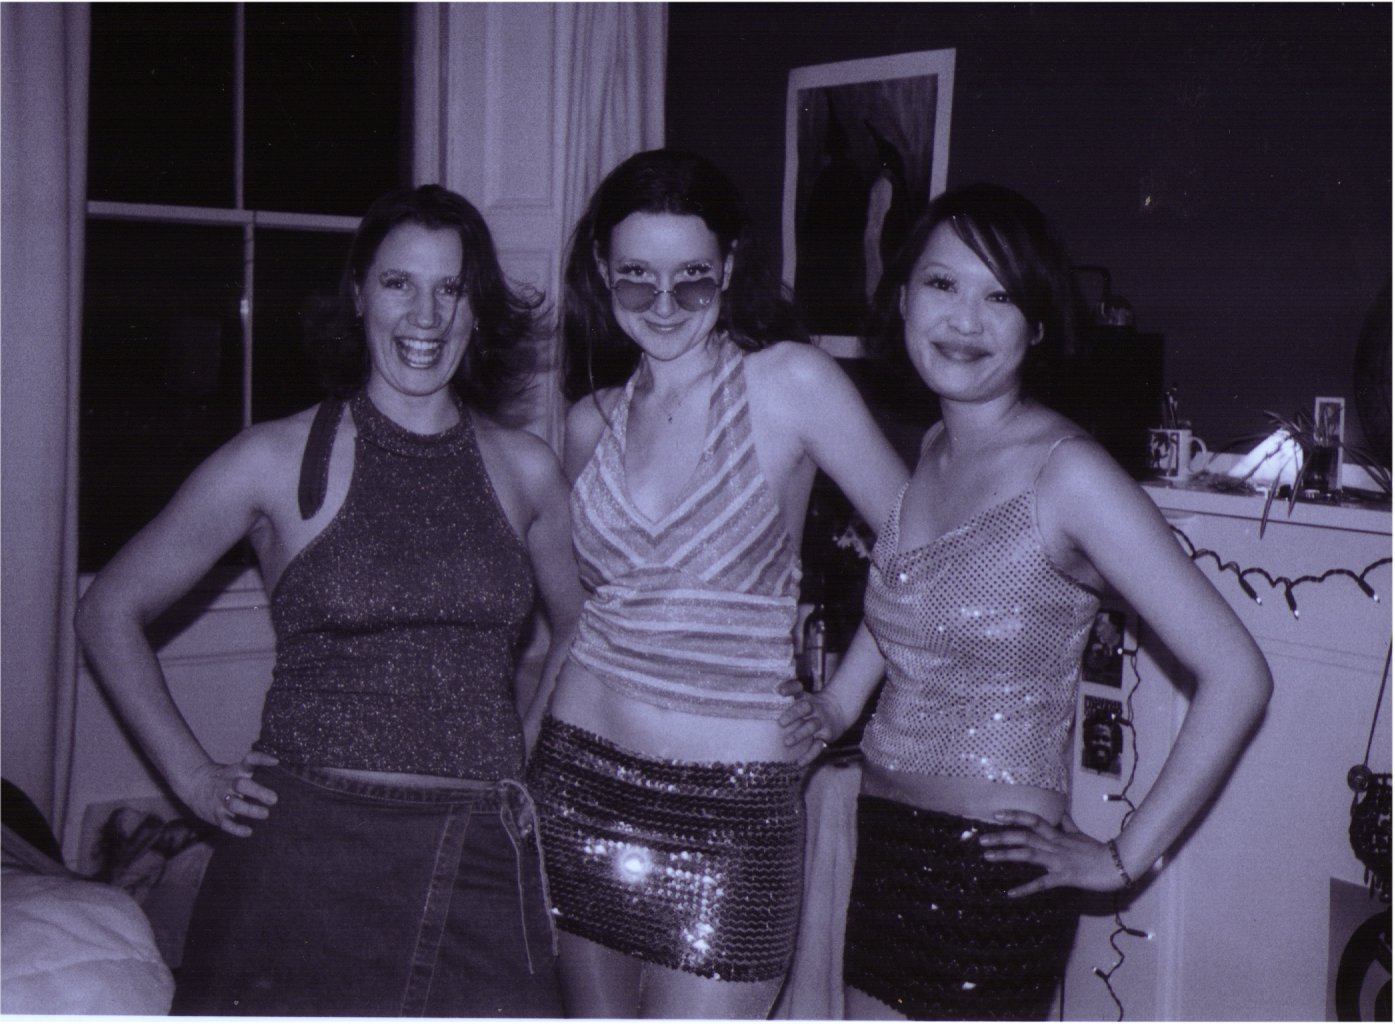 70s girls (Alison, Voon, Tingy) (Alison Pease, Fiona McNeill, Isabelle Ting)